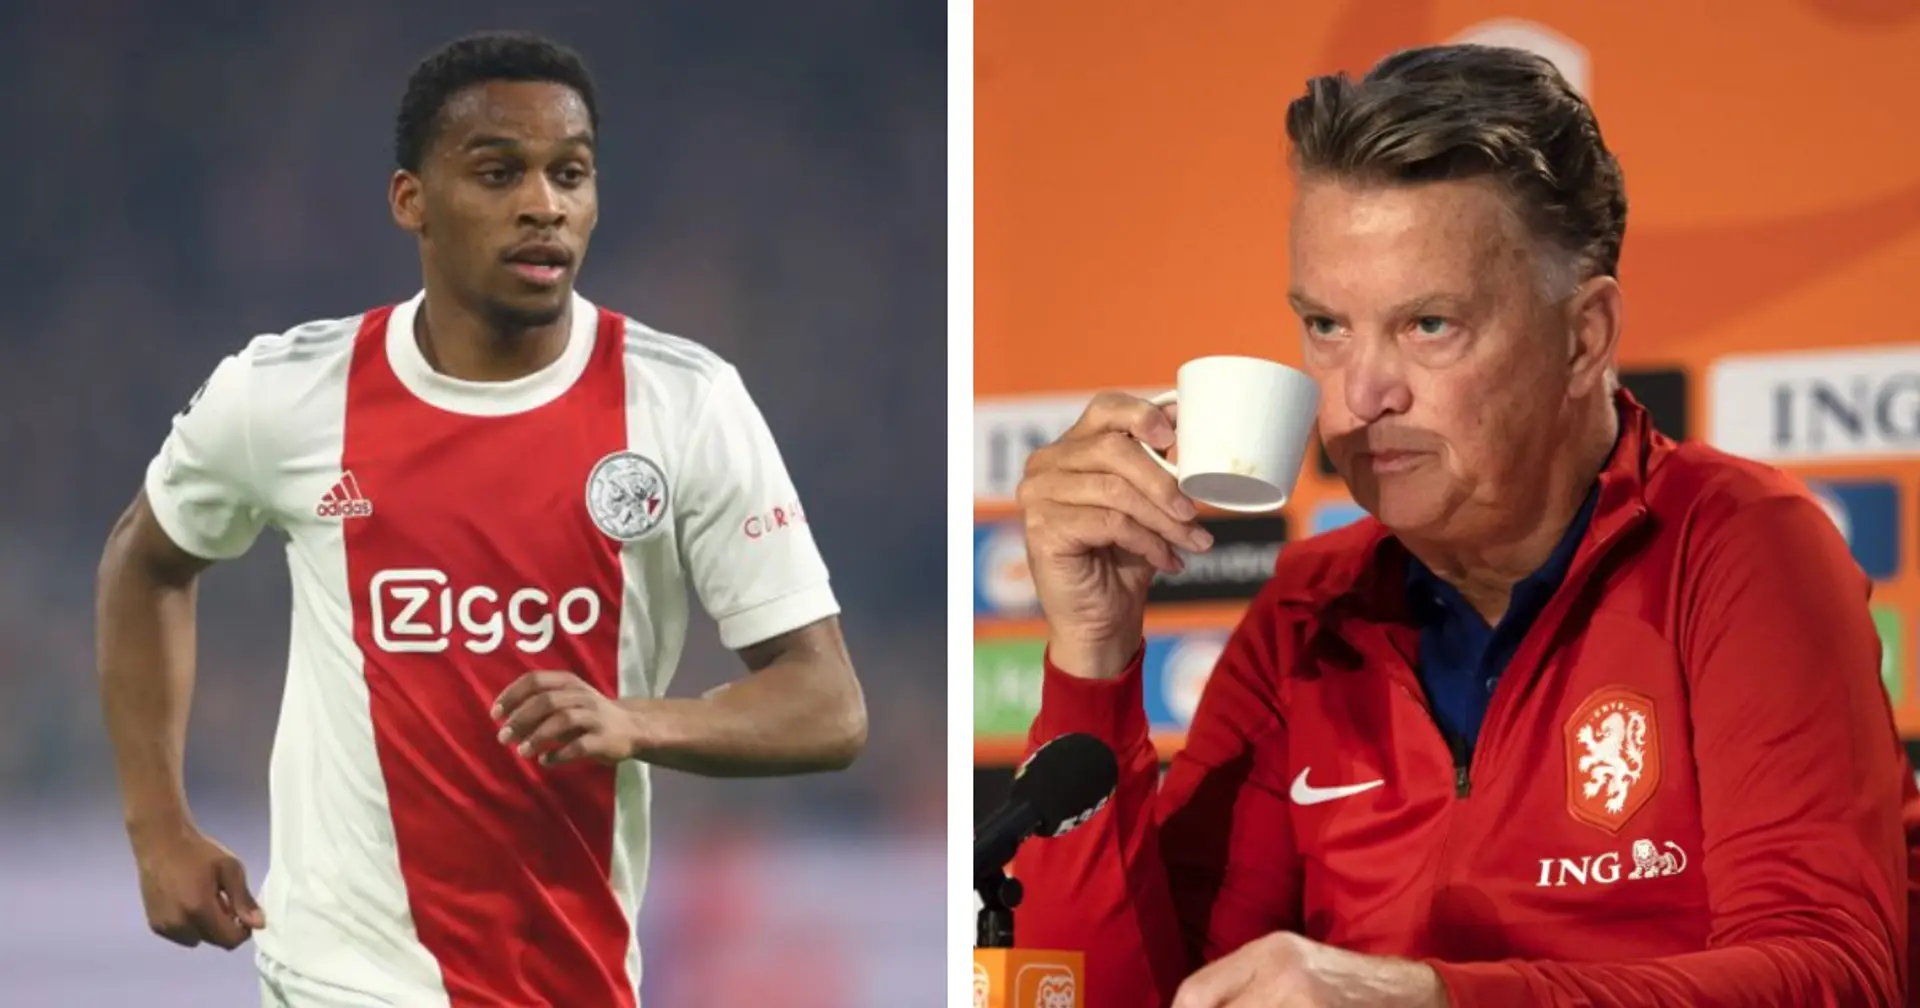 'Many players have called me': Louis van Gaal responds to rumours that he urged Dutch players to snub Man United